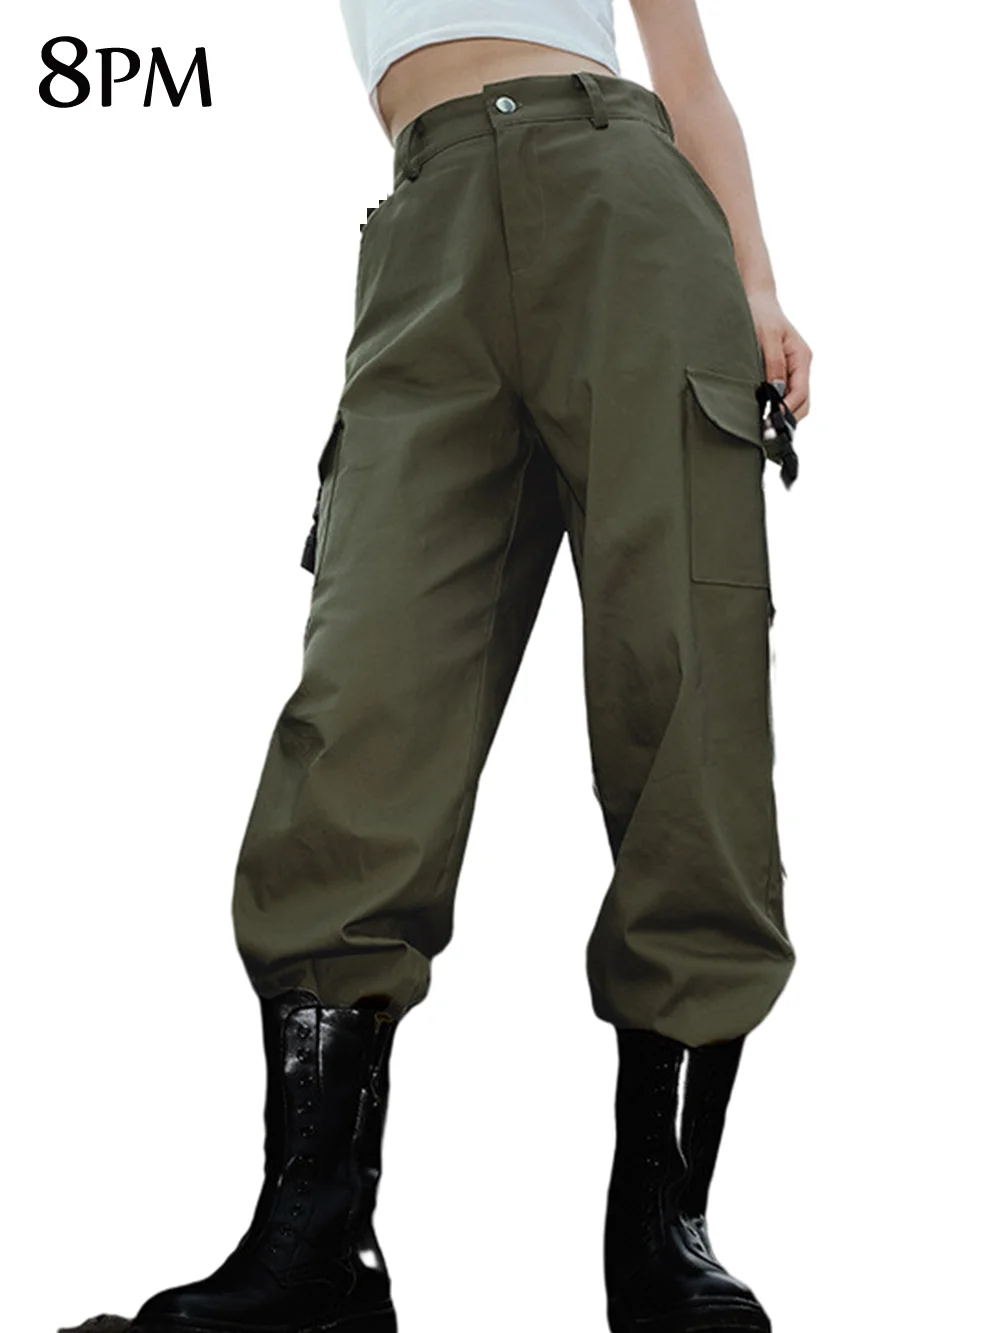 

Womens High Waisted Cargo Pants Pockets Casual Loose Combat Twill Trousers Girls Hip Hop Harem Pants Sweatpants ouc091